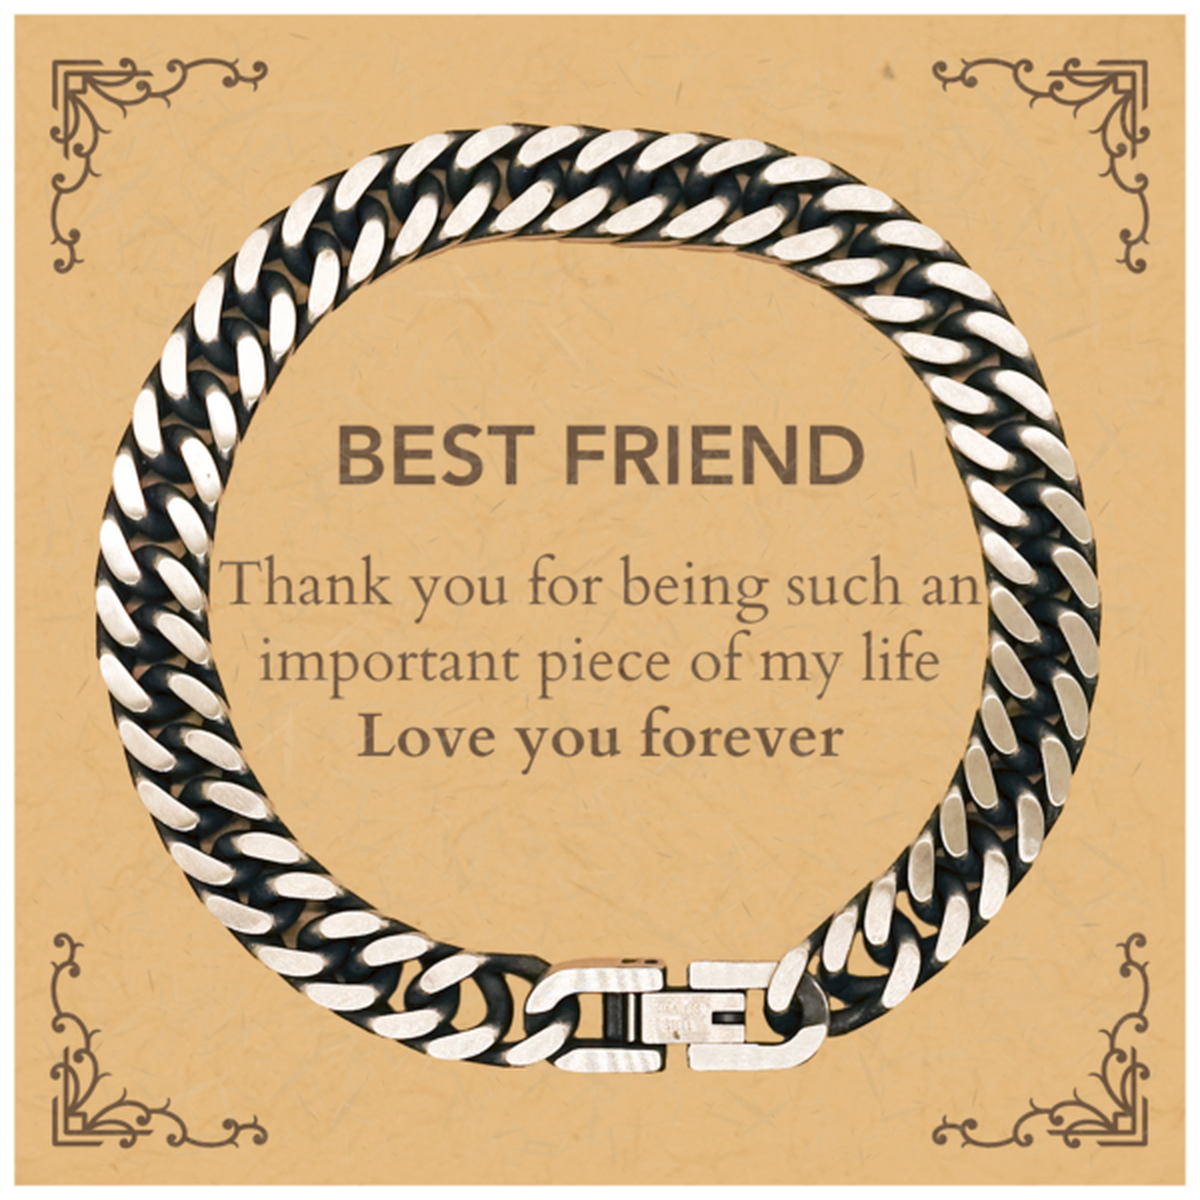 Appropriate Best Friend Cuban Link Chain Bracelet Epic Birthday Gifts for Best Friend Thank you for being such an important piece of my life Best Friend Christmas Mothers Fathers Day